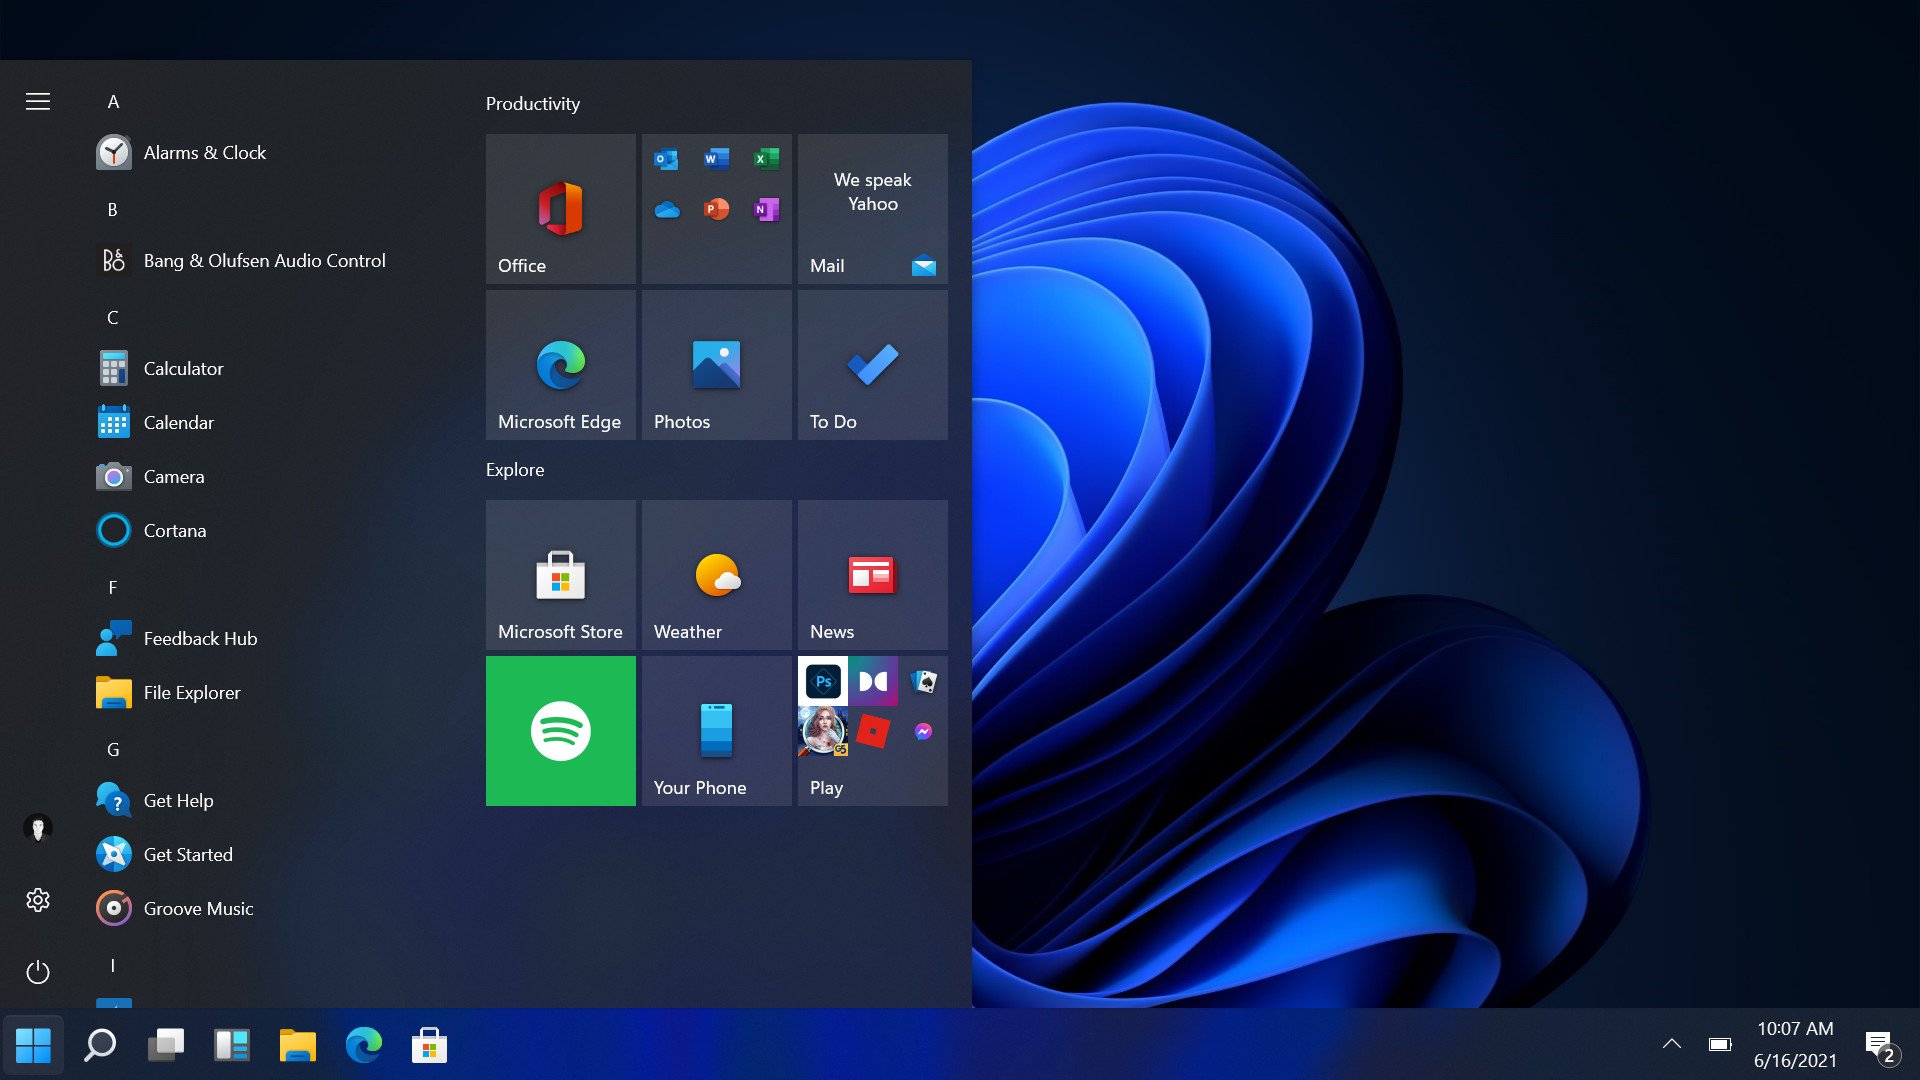 MiracleOS is everything we want Windows 12 to be (and more) | BetaNews